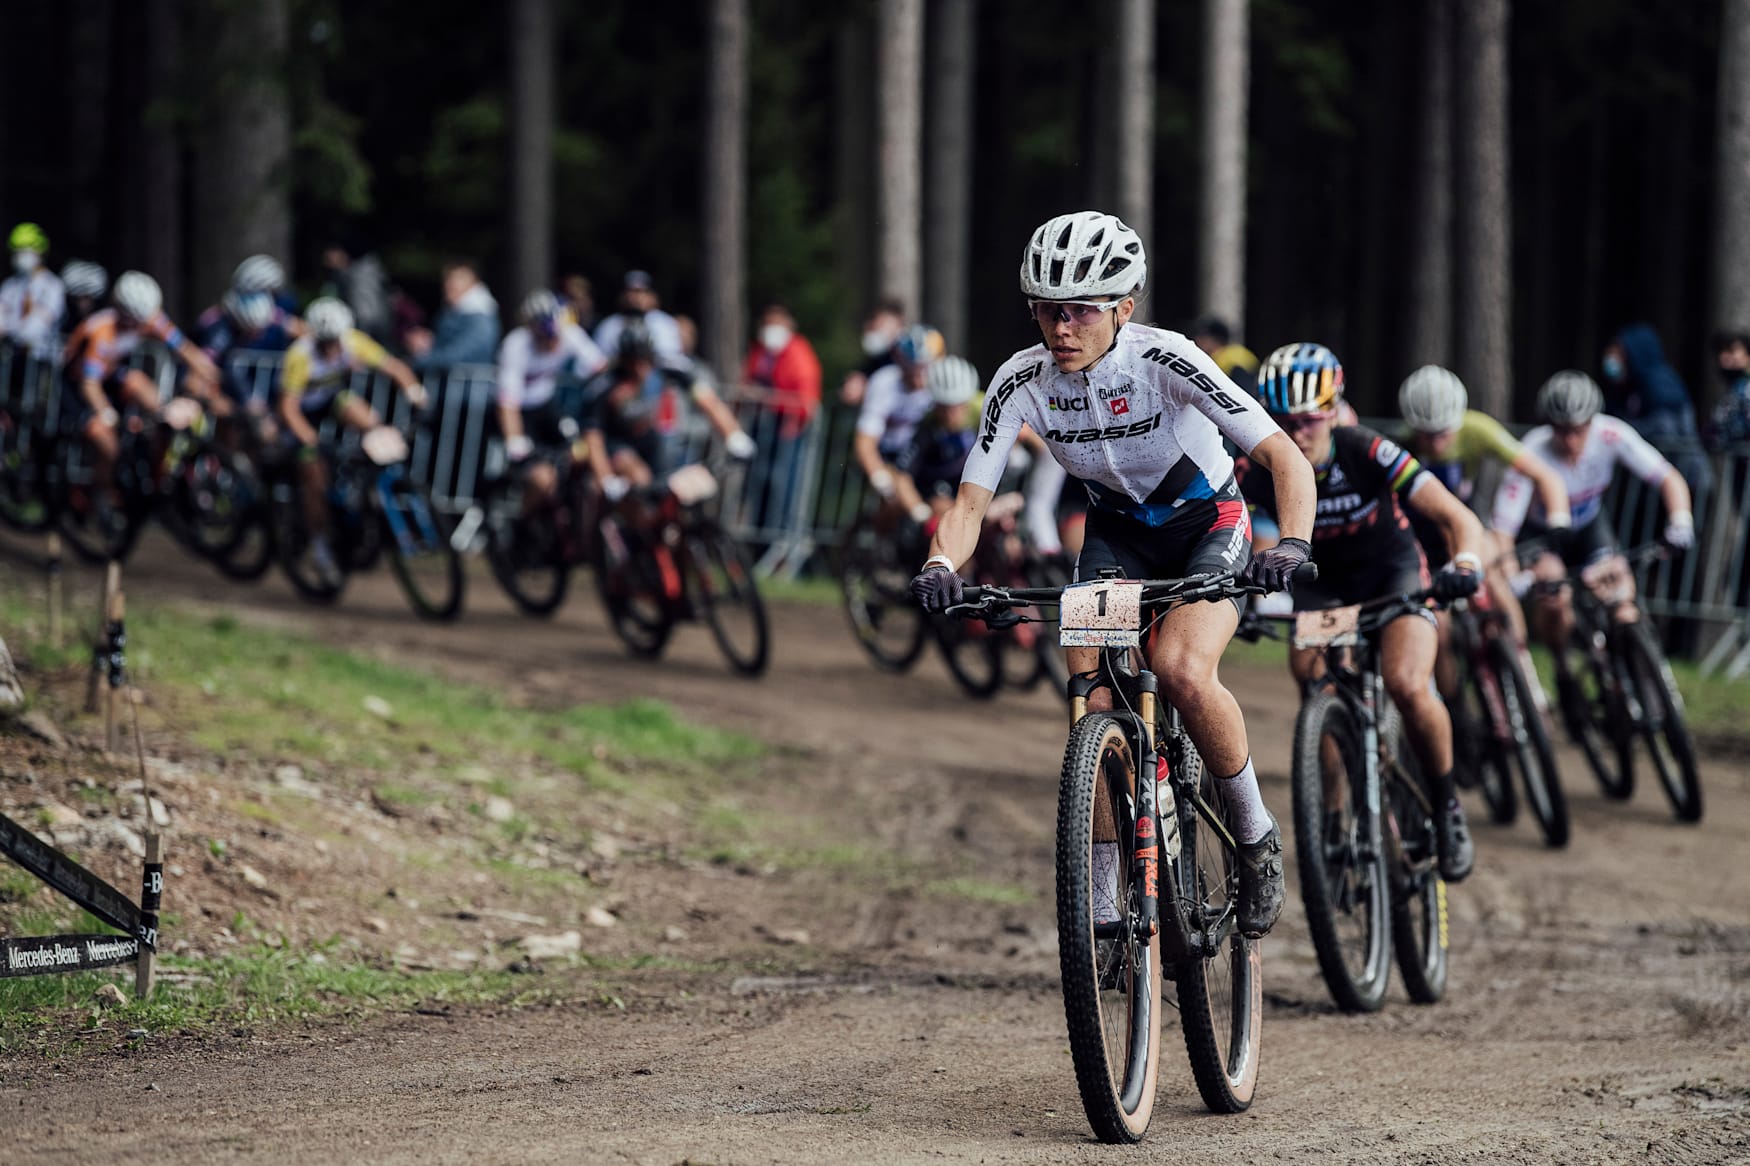 Loana Lecomte performs at UCI XCO in Nove Mesto na Morave, Czech Republic on May 16th, 2021.